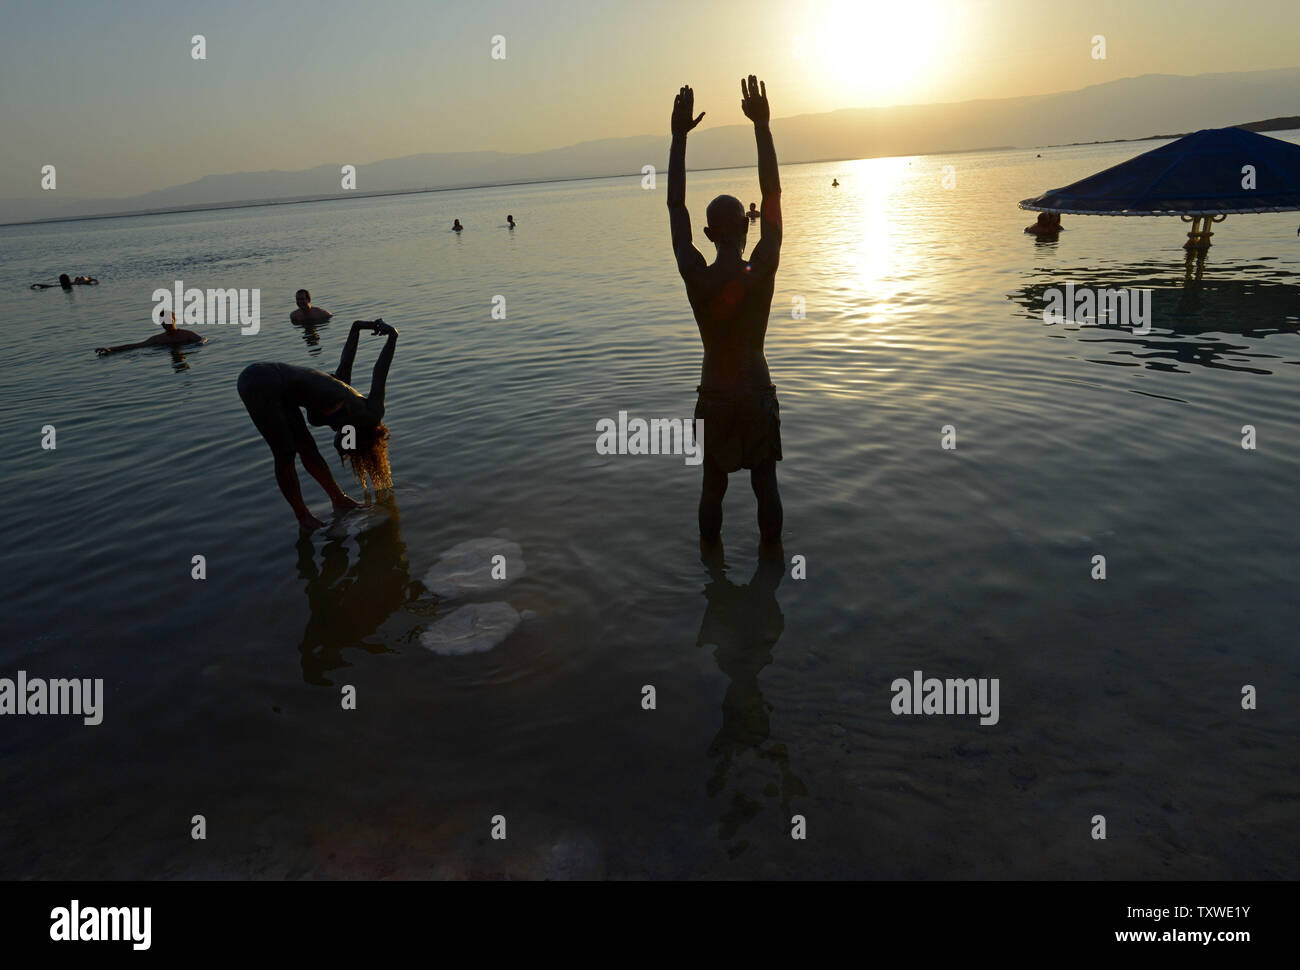 Israelis practice yoga poses on  salt crusts in the Dead Sea during an Israeli and international environmental  social  protest float at dawn against the deterioration of the Dead Sea,  Ein Bokek, Israel, September 14, 2012.  The  event was organized by U.S. photographer Spencer Tunick.  UPI/Debbie Hill Stock Photo